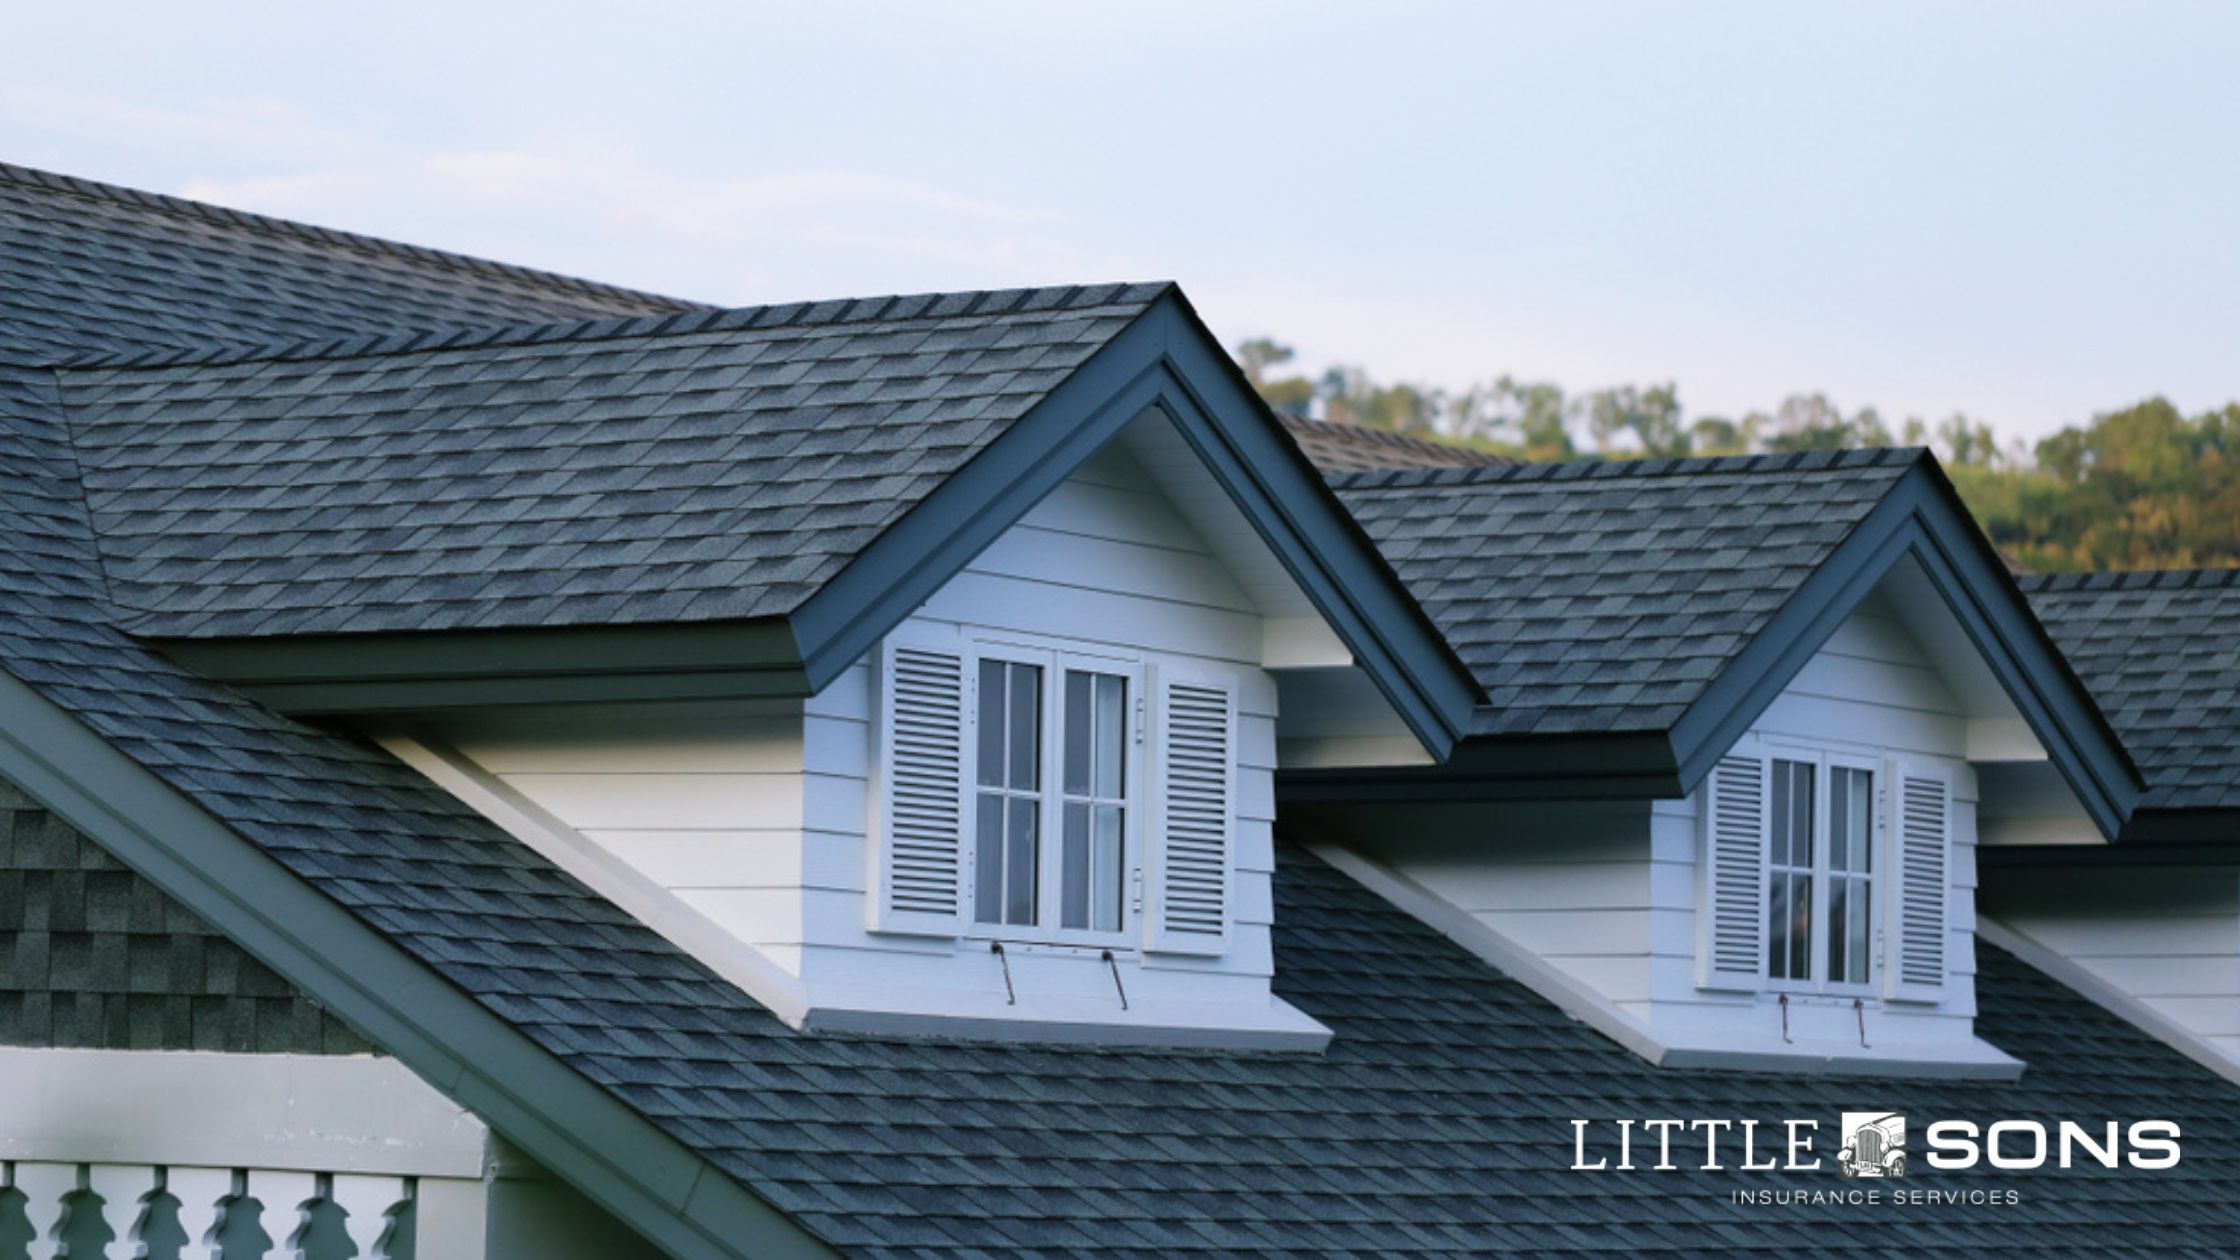 Roof Requirements for Homeowners Insurance